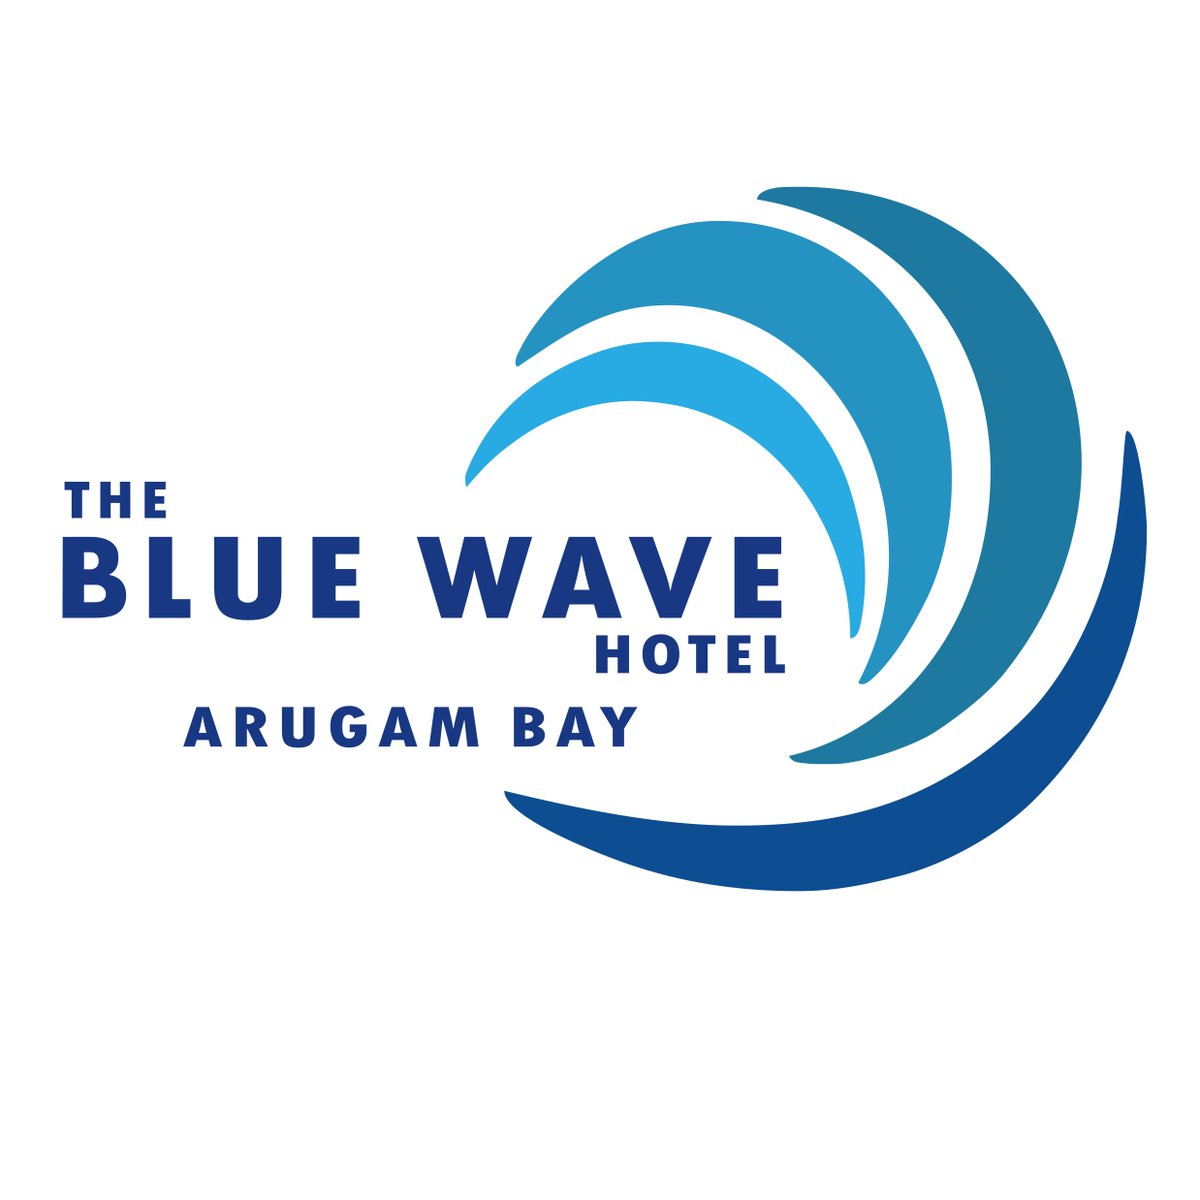 The Blue Wave Hotel